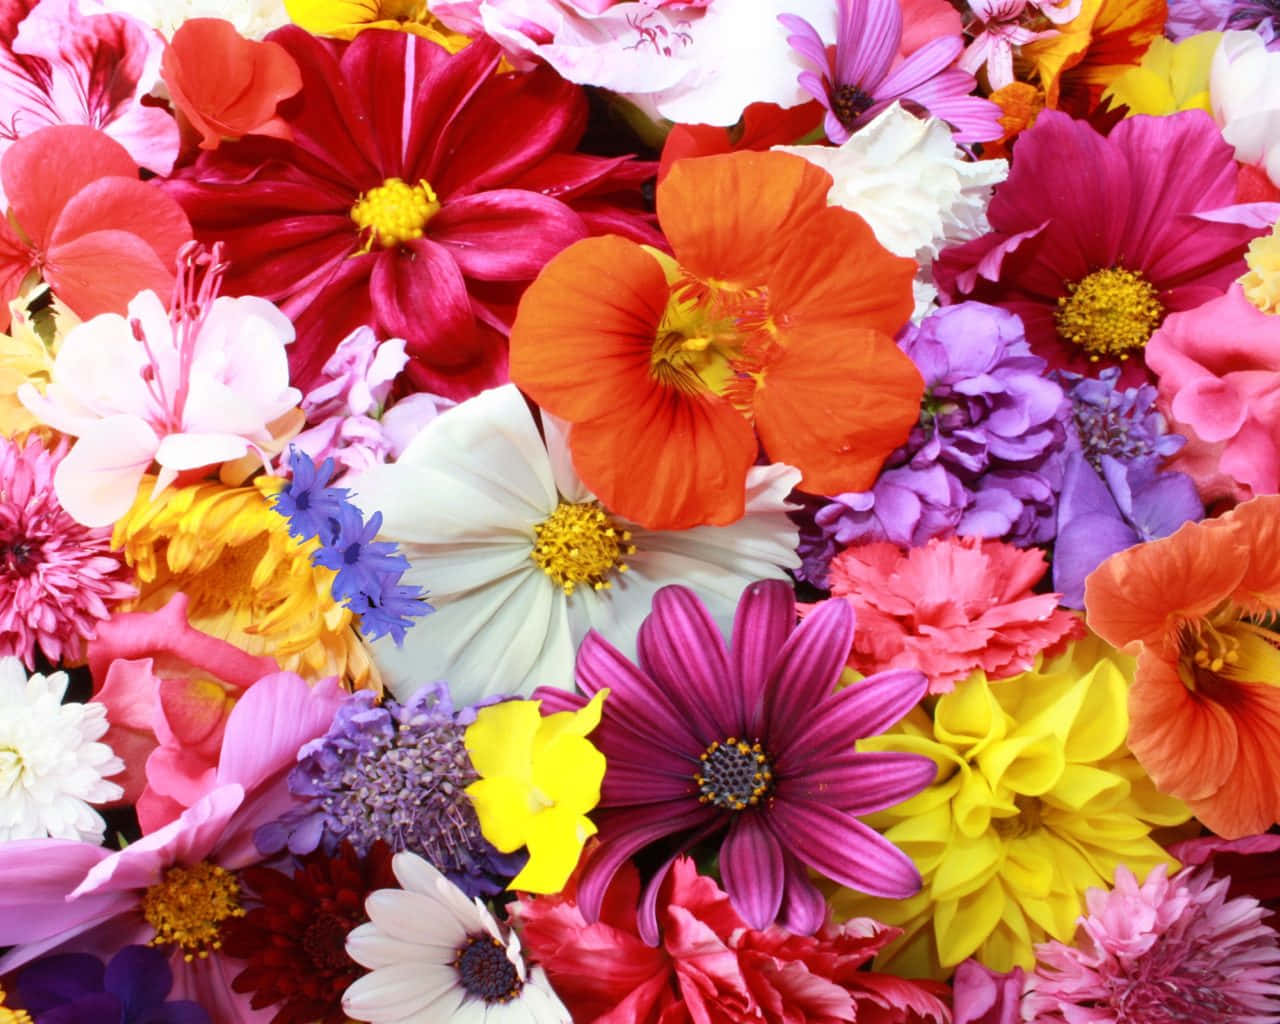 Download Vibrant Bouquet of Colorful Flowers Wallpaper | Wallpapers.com